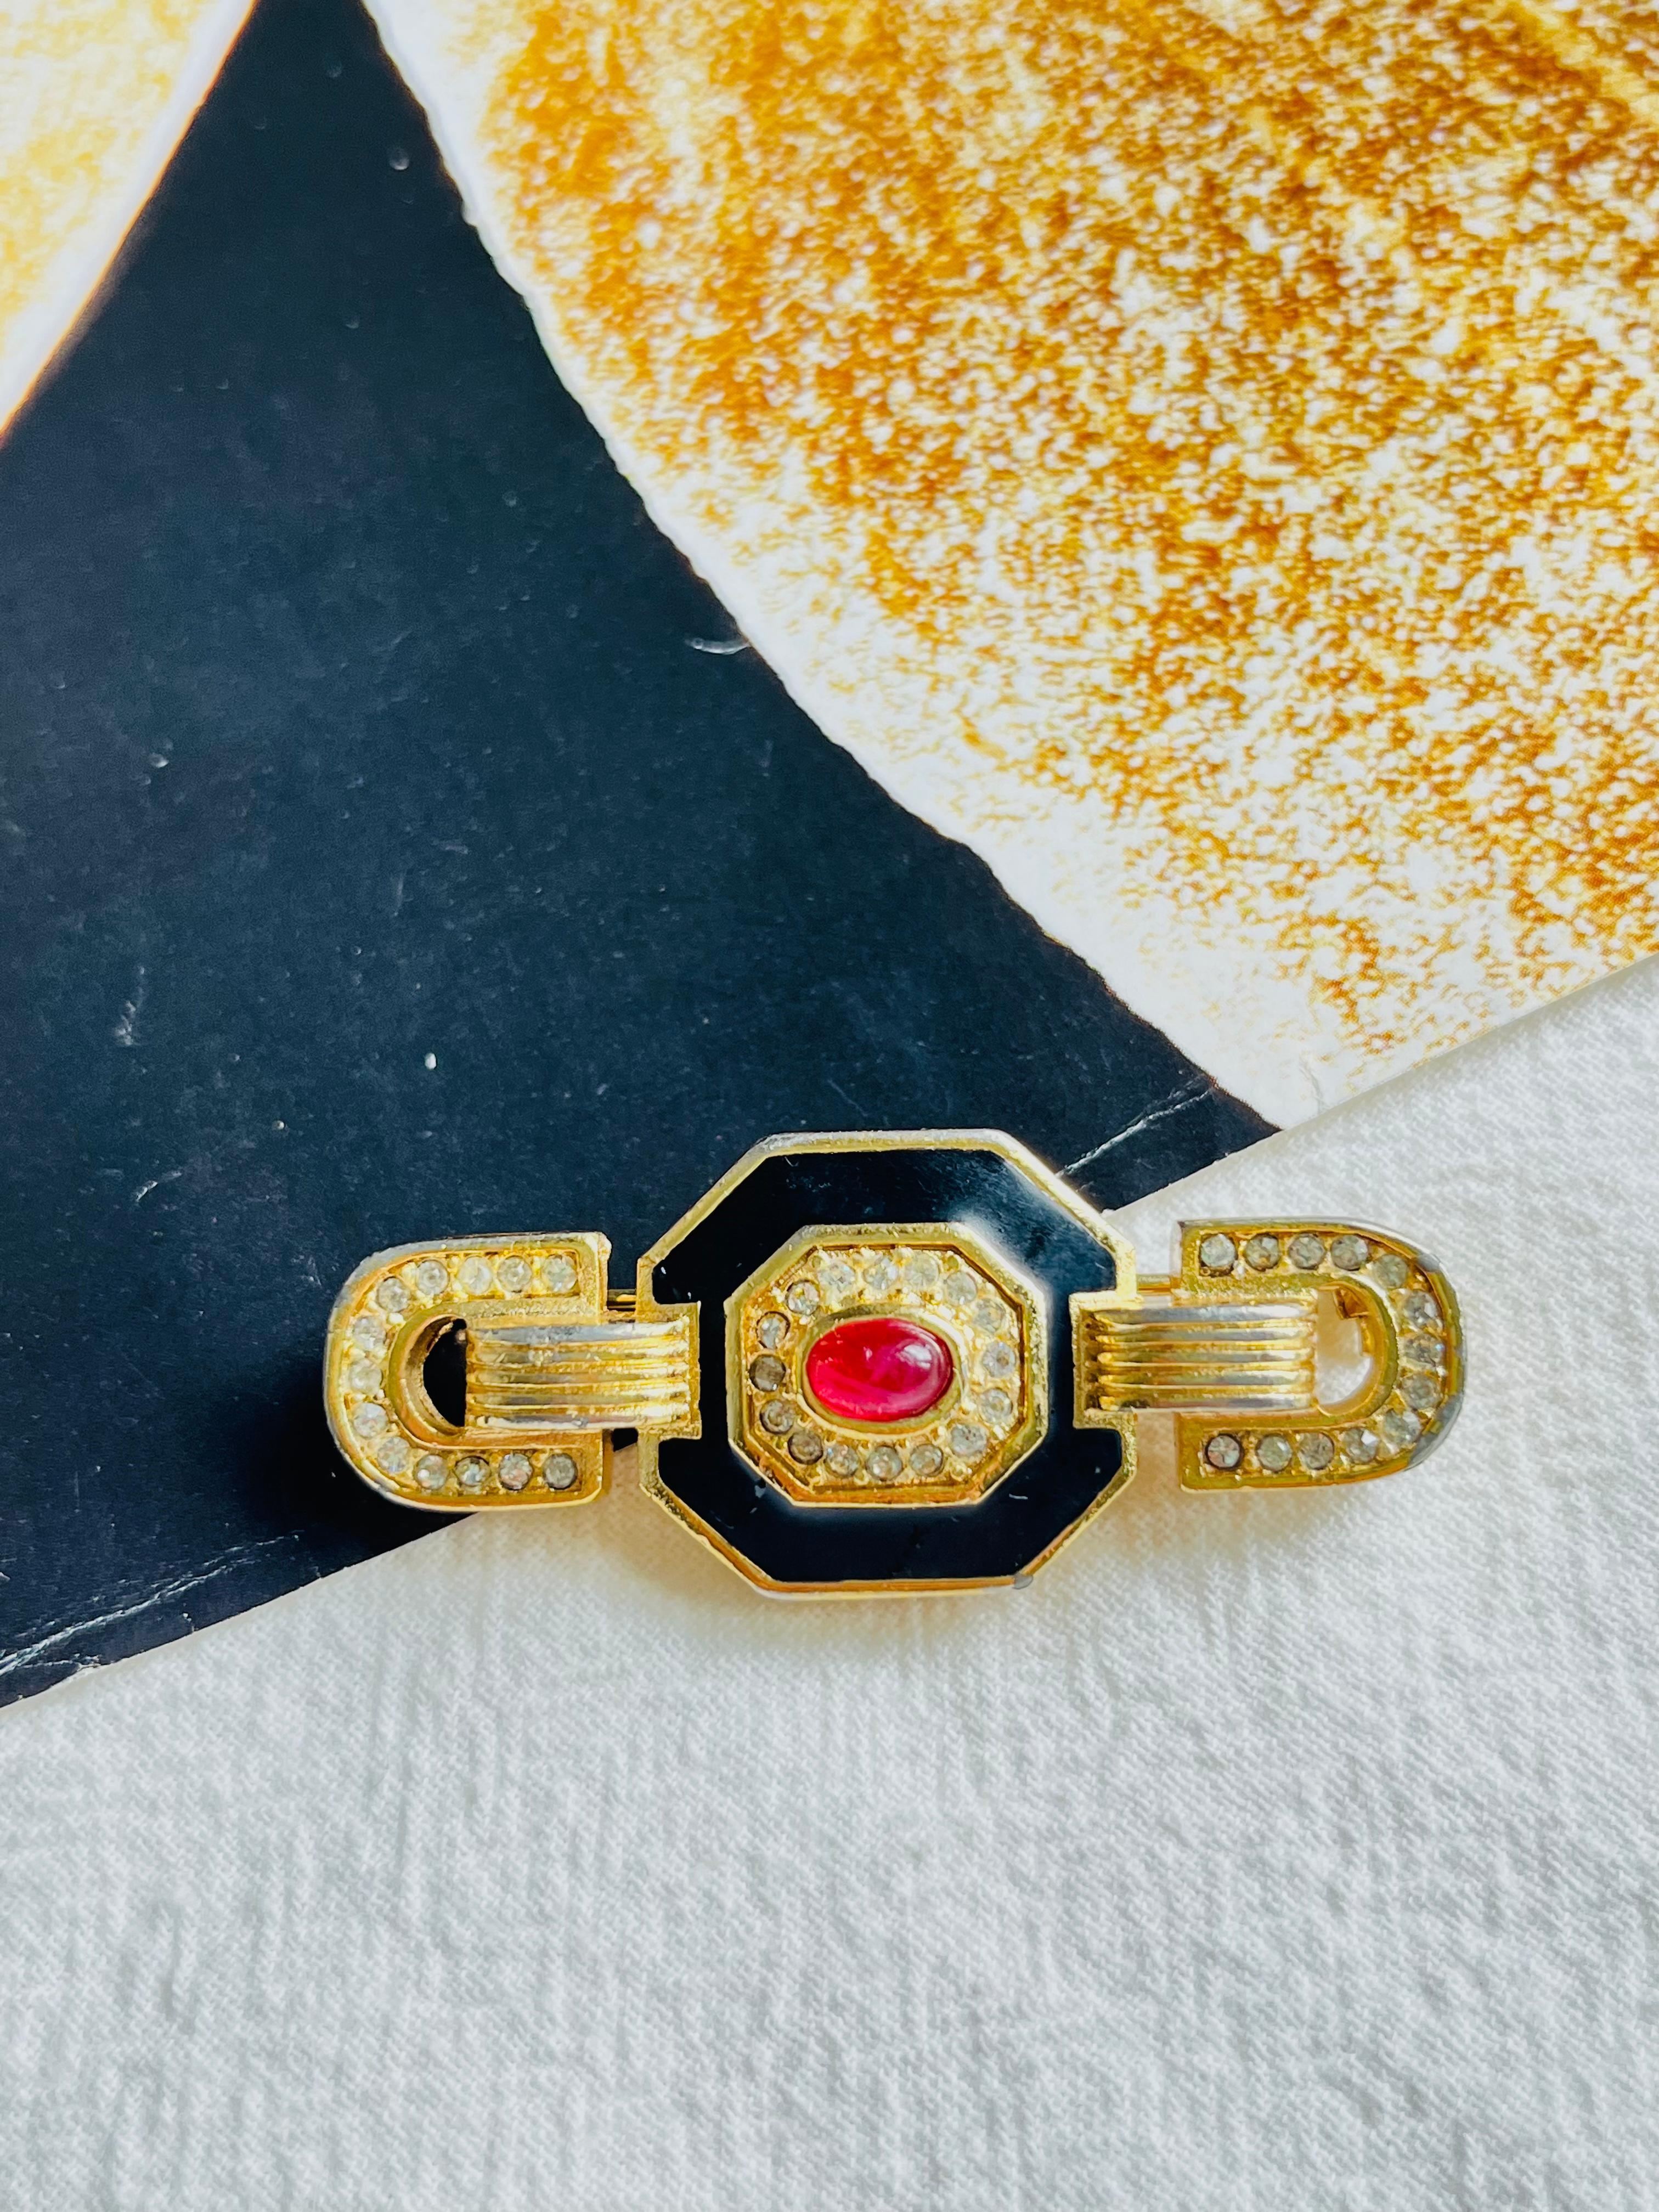 Christian Dior Vintage 1980s Long Ruby Red Gripoix Black Crystals Octagon Brooch, Gold Tone

Very good condition. Light scratches or colour loss. 100% genuine. 

A unique piece. This is gold plated stylised brooch. 

Safety-catch pin closure.